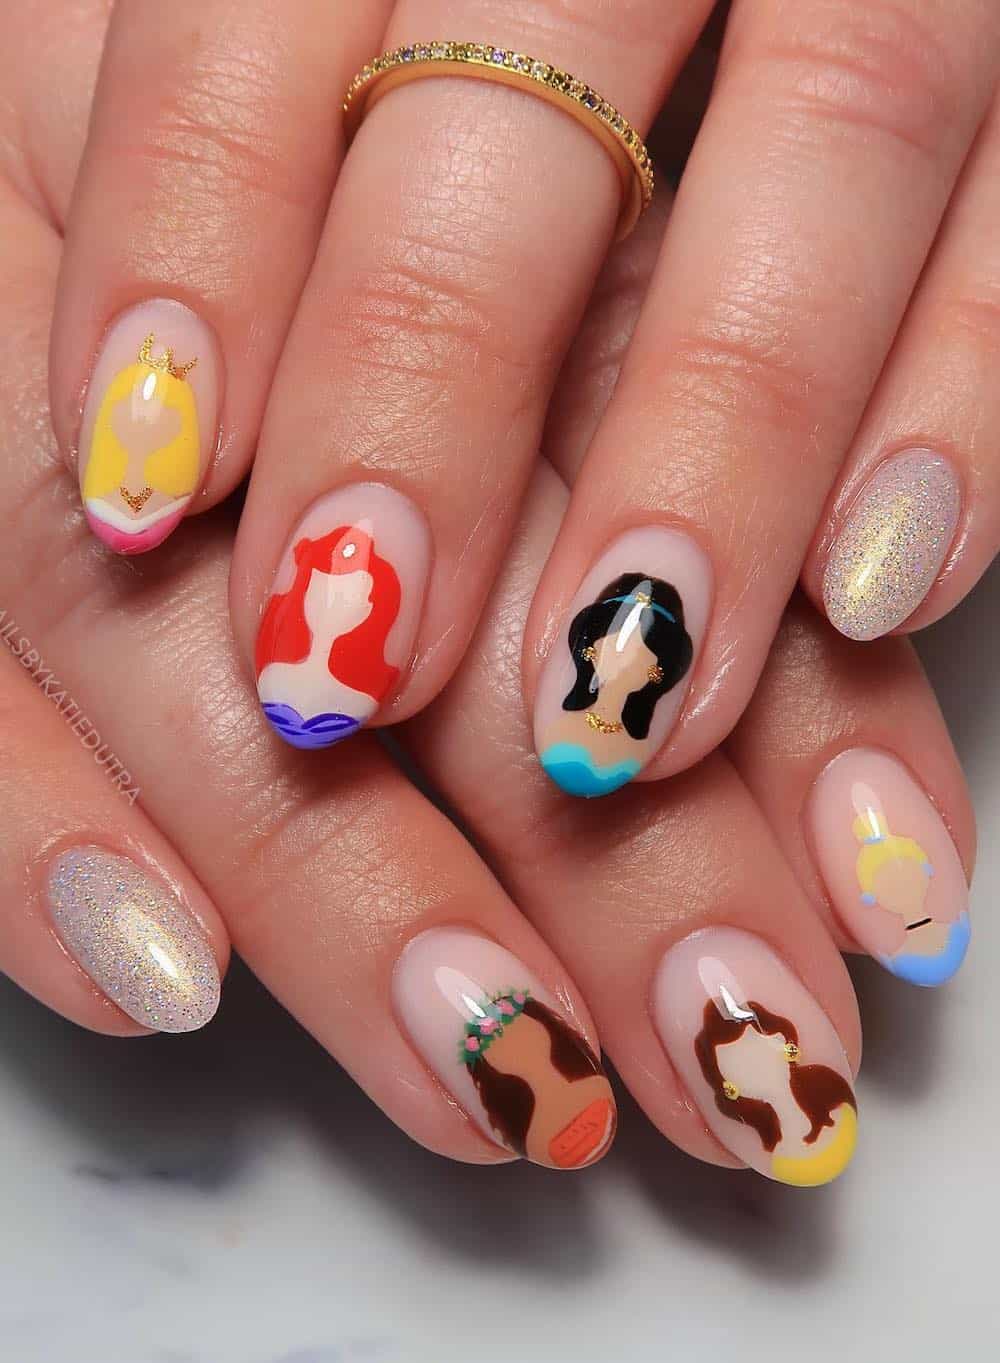 Short almond nails with a Disney design featuring simple princess nail art